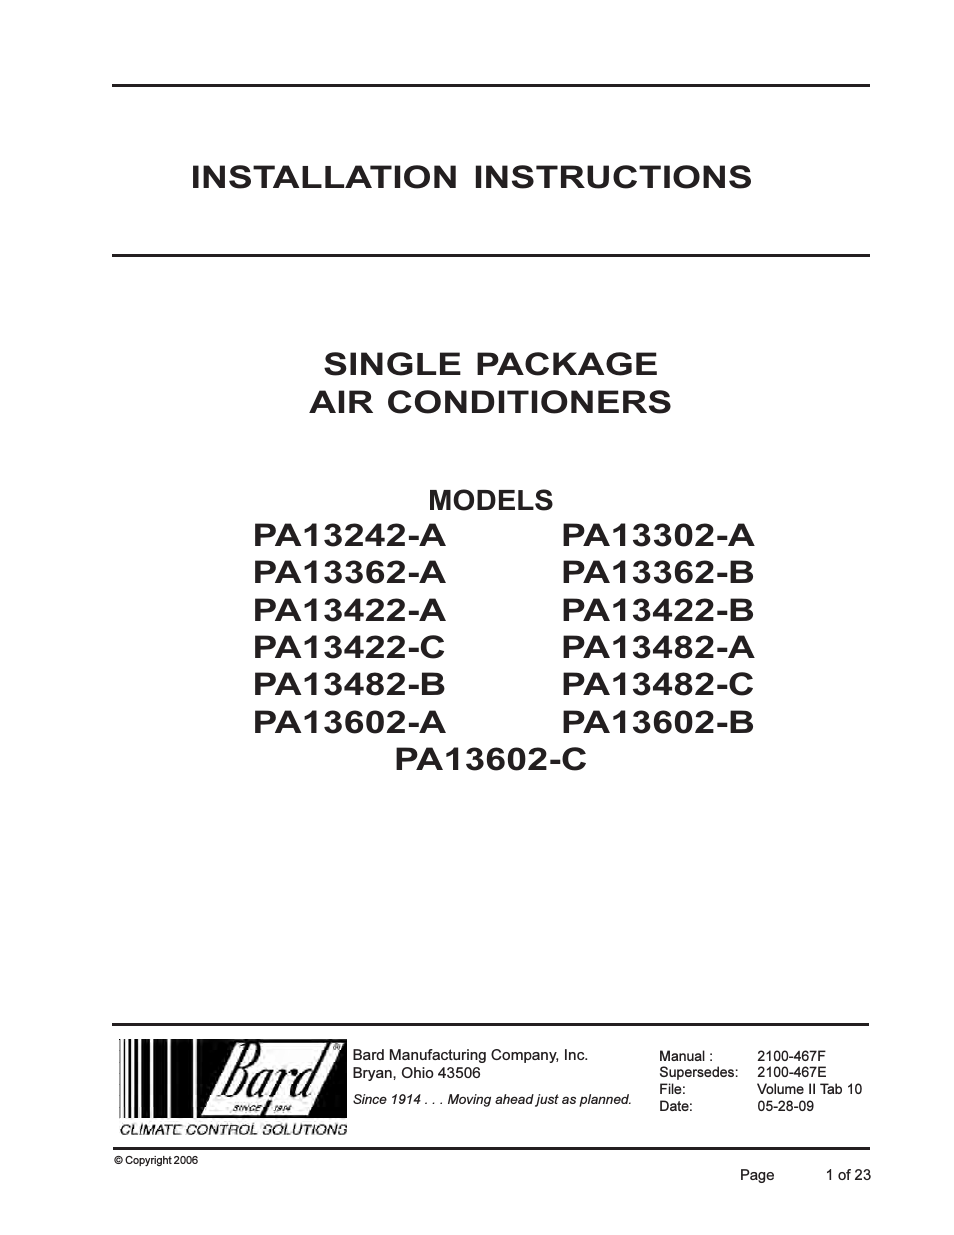 Single Package Air Conditioners PA13362-B